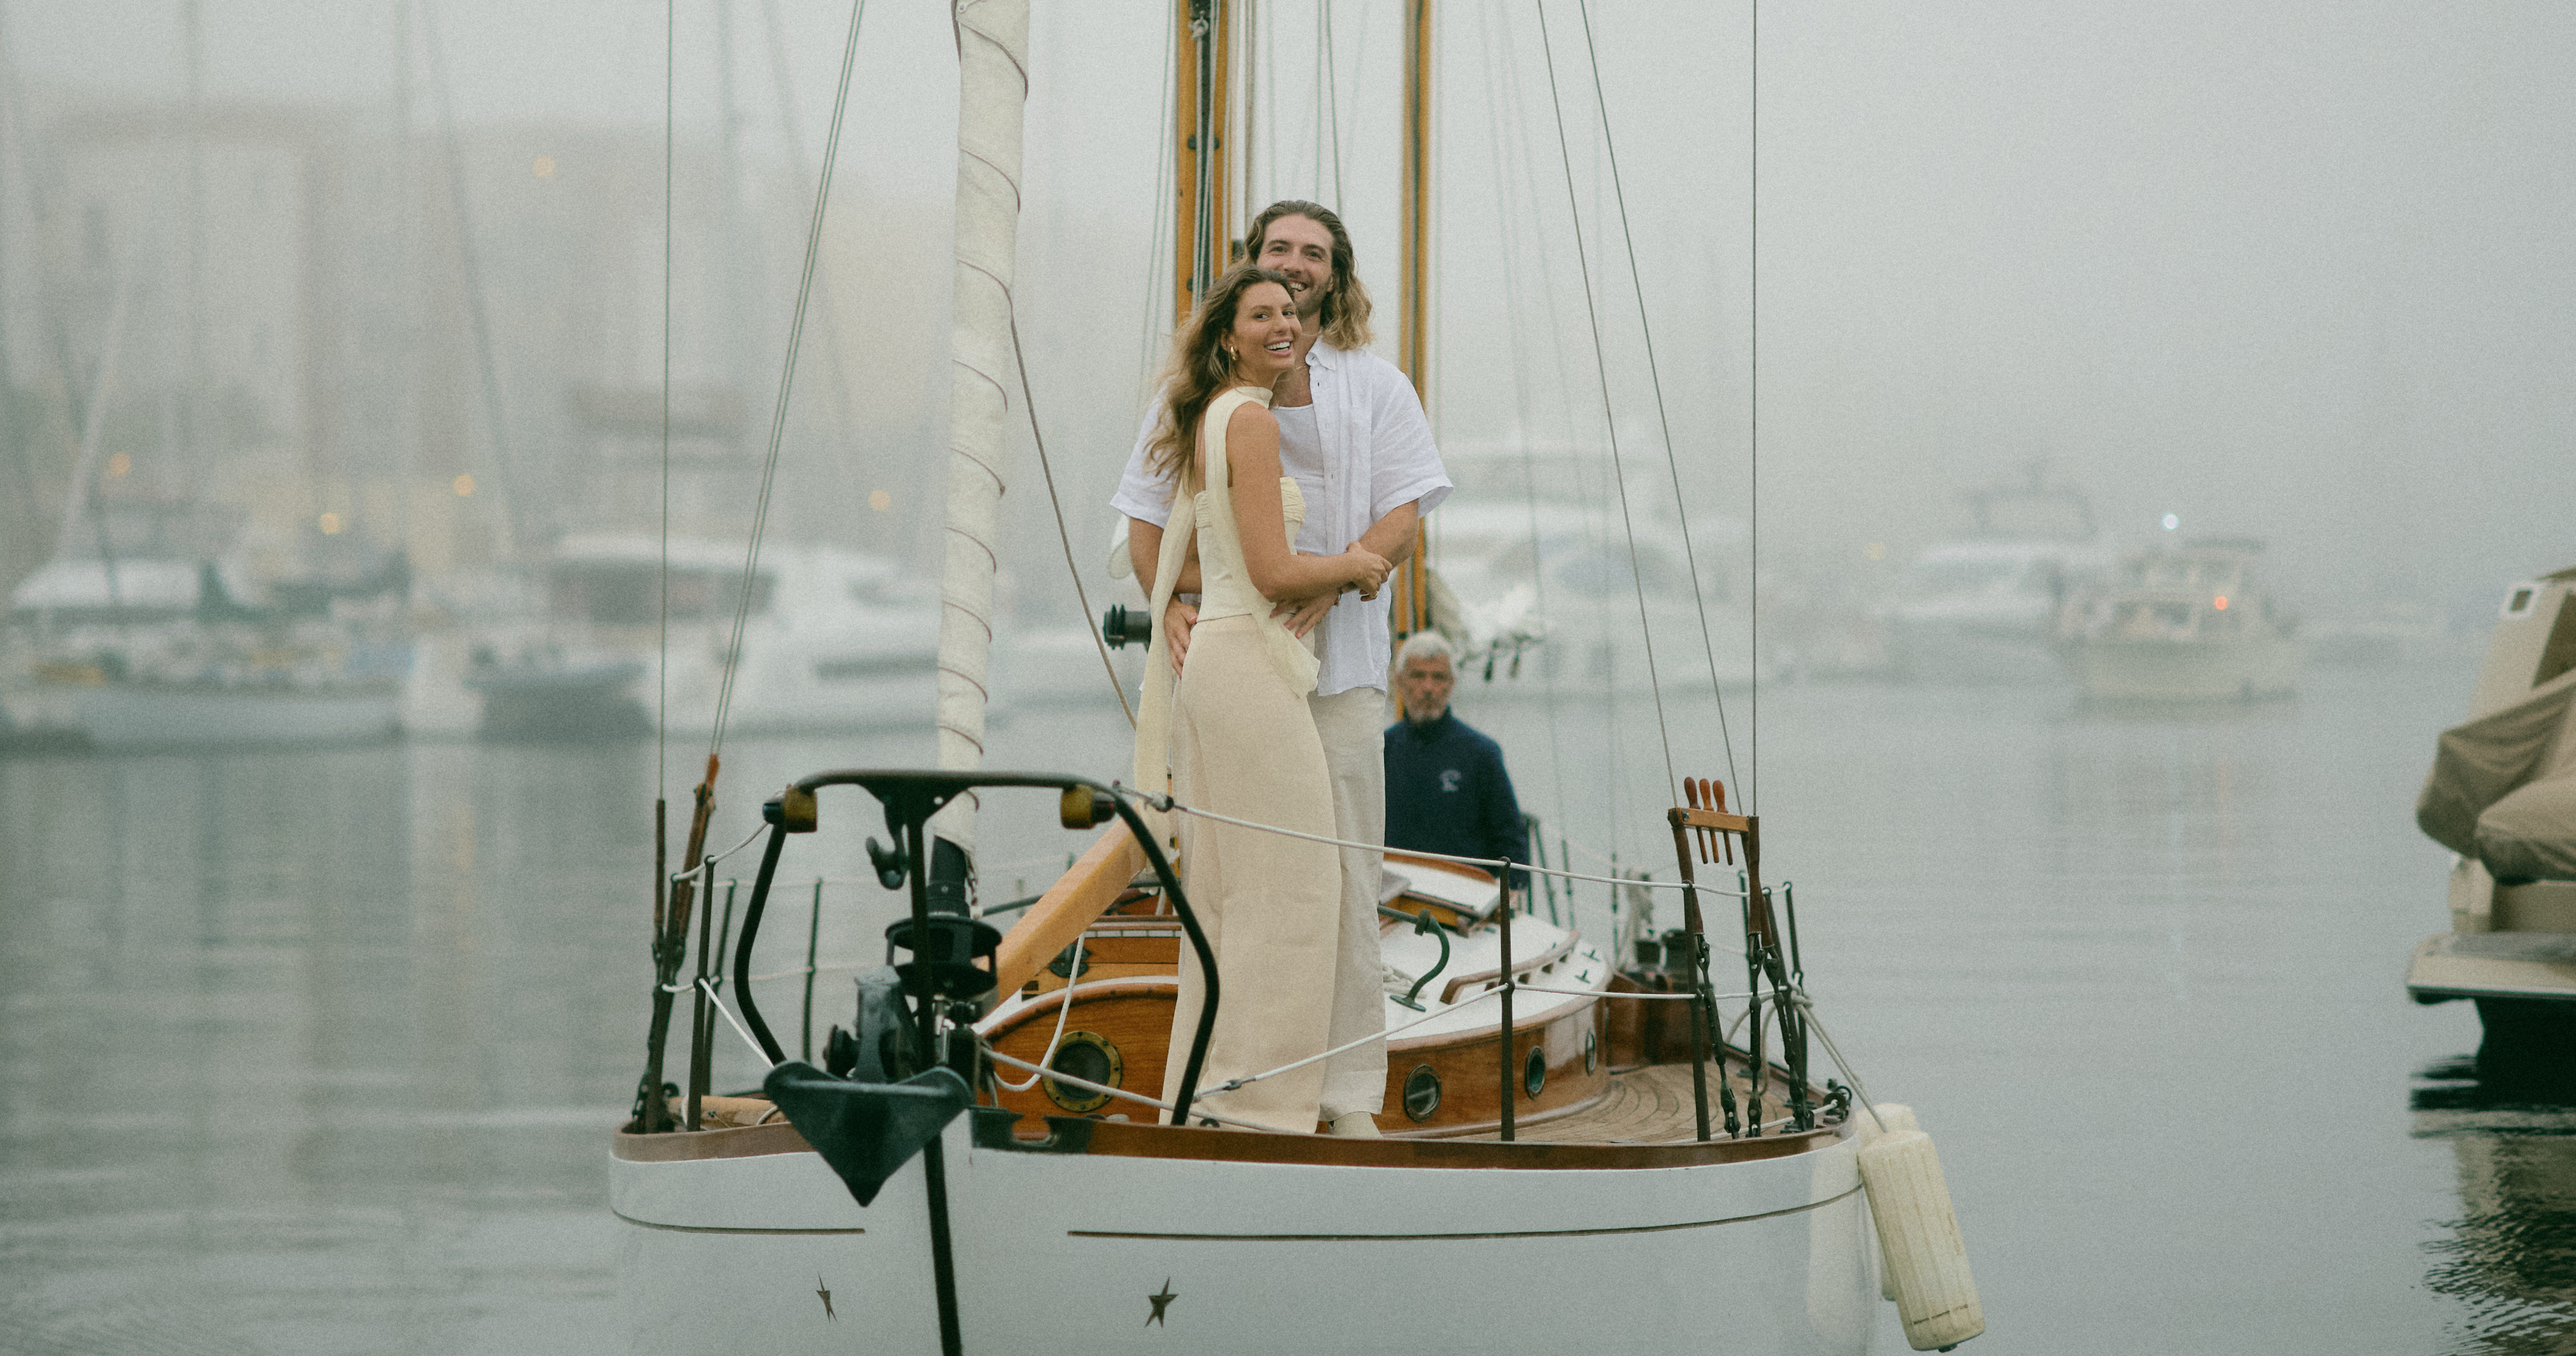 Lovers in the Mist | Wedding Photoshoot in California